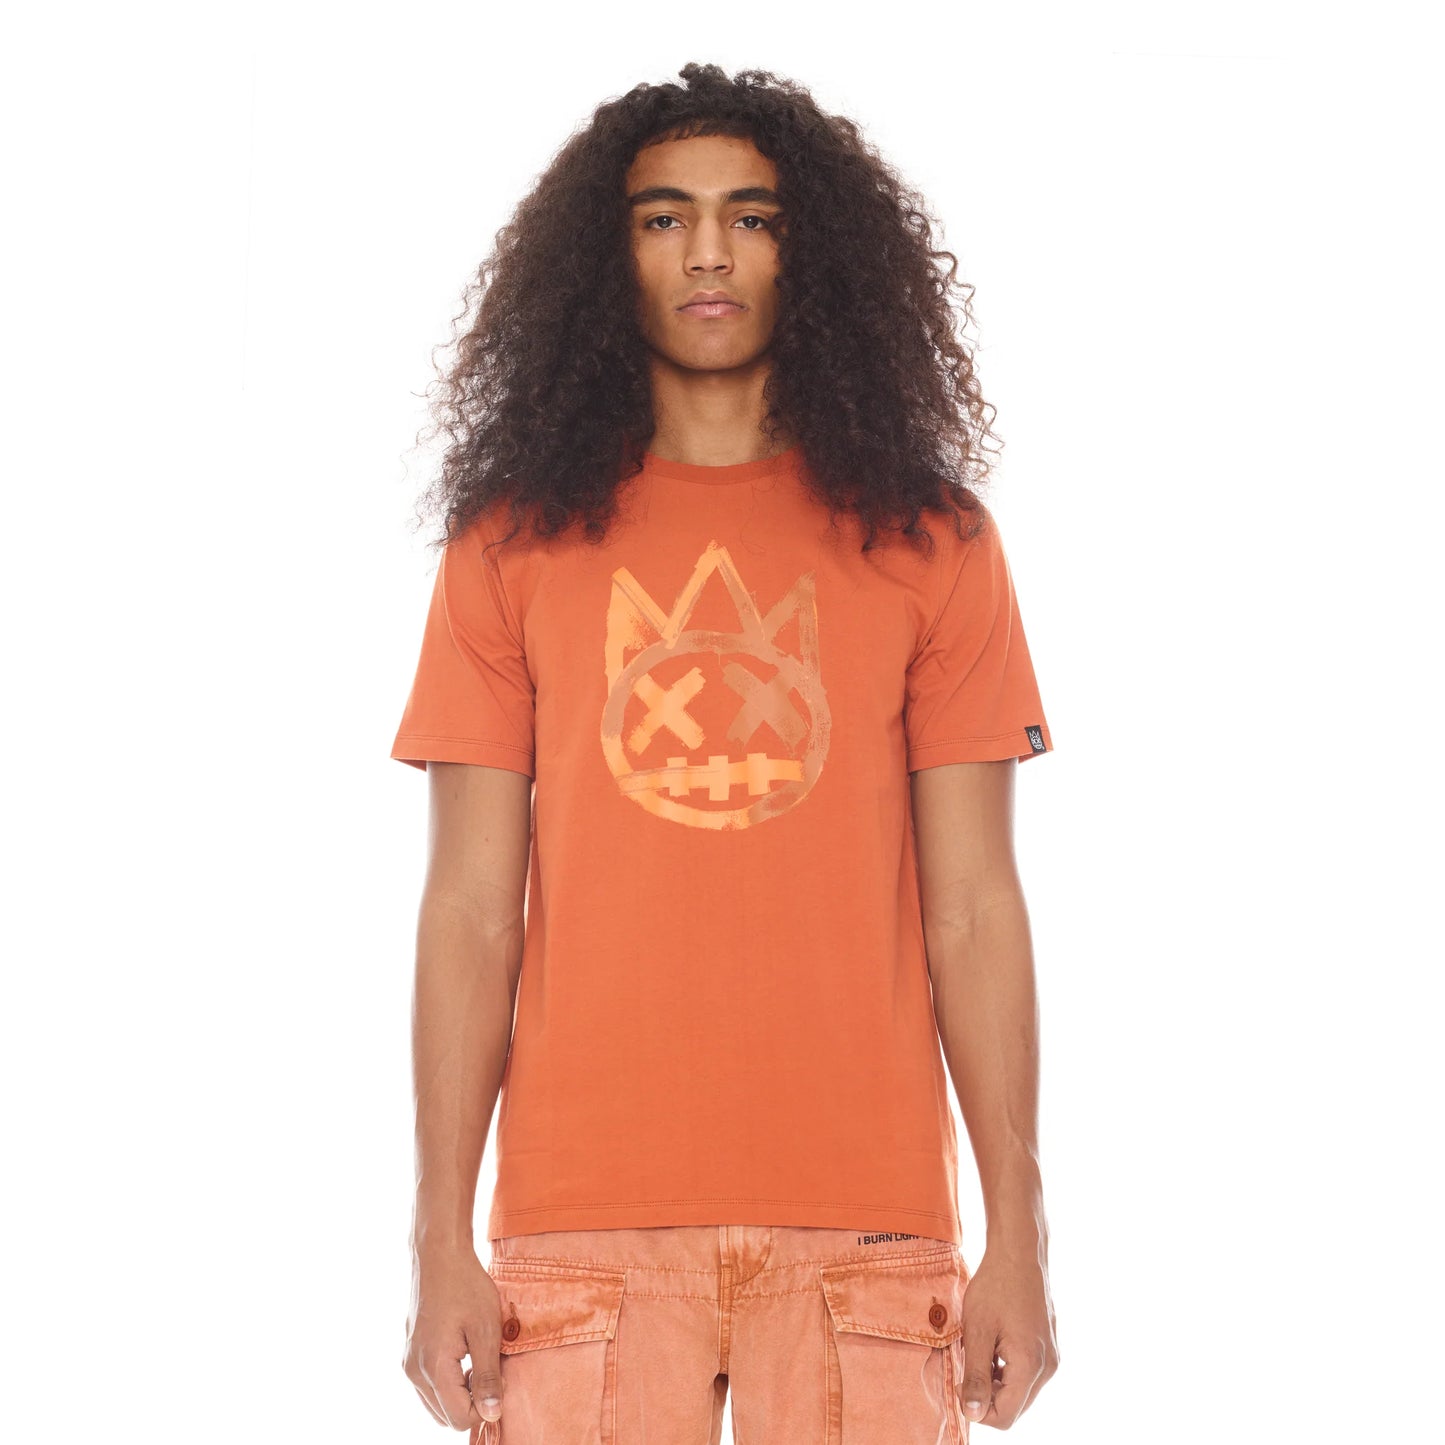 SHIMUCHAN BRUSHED LOGO SHORT SLEEVE CREW NECK TEE 26/1'S IN RUST